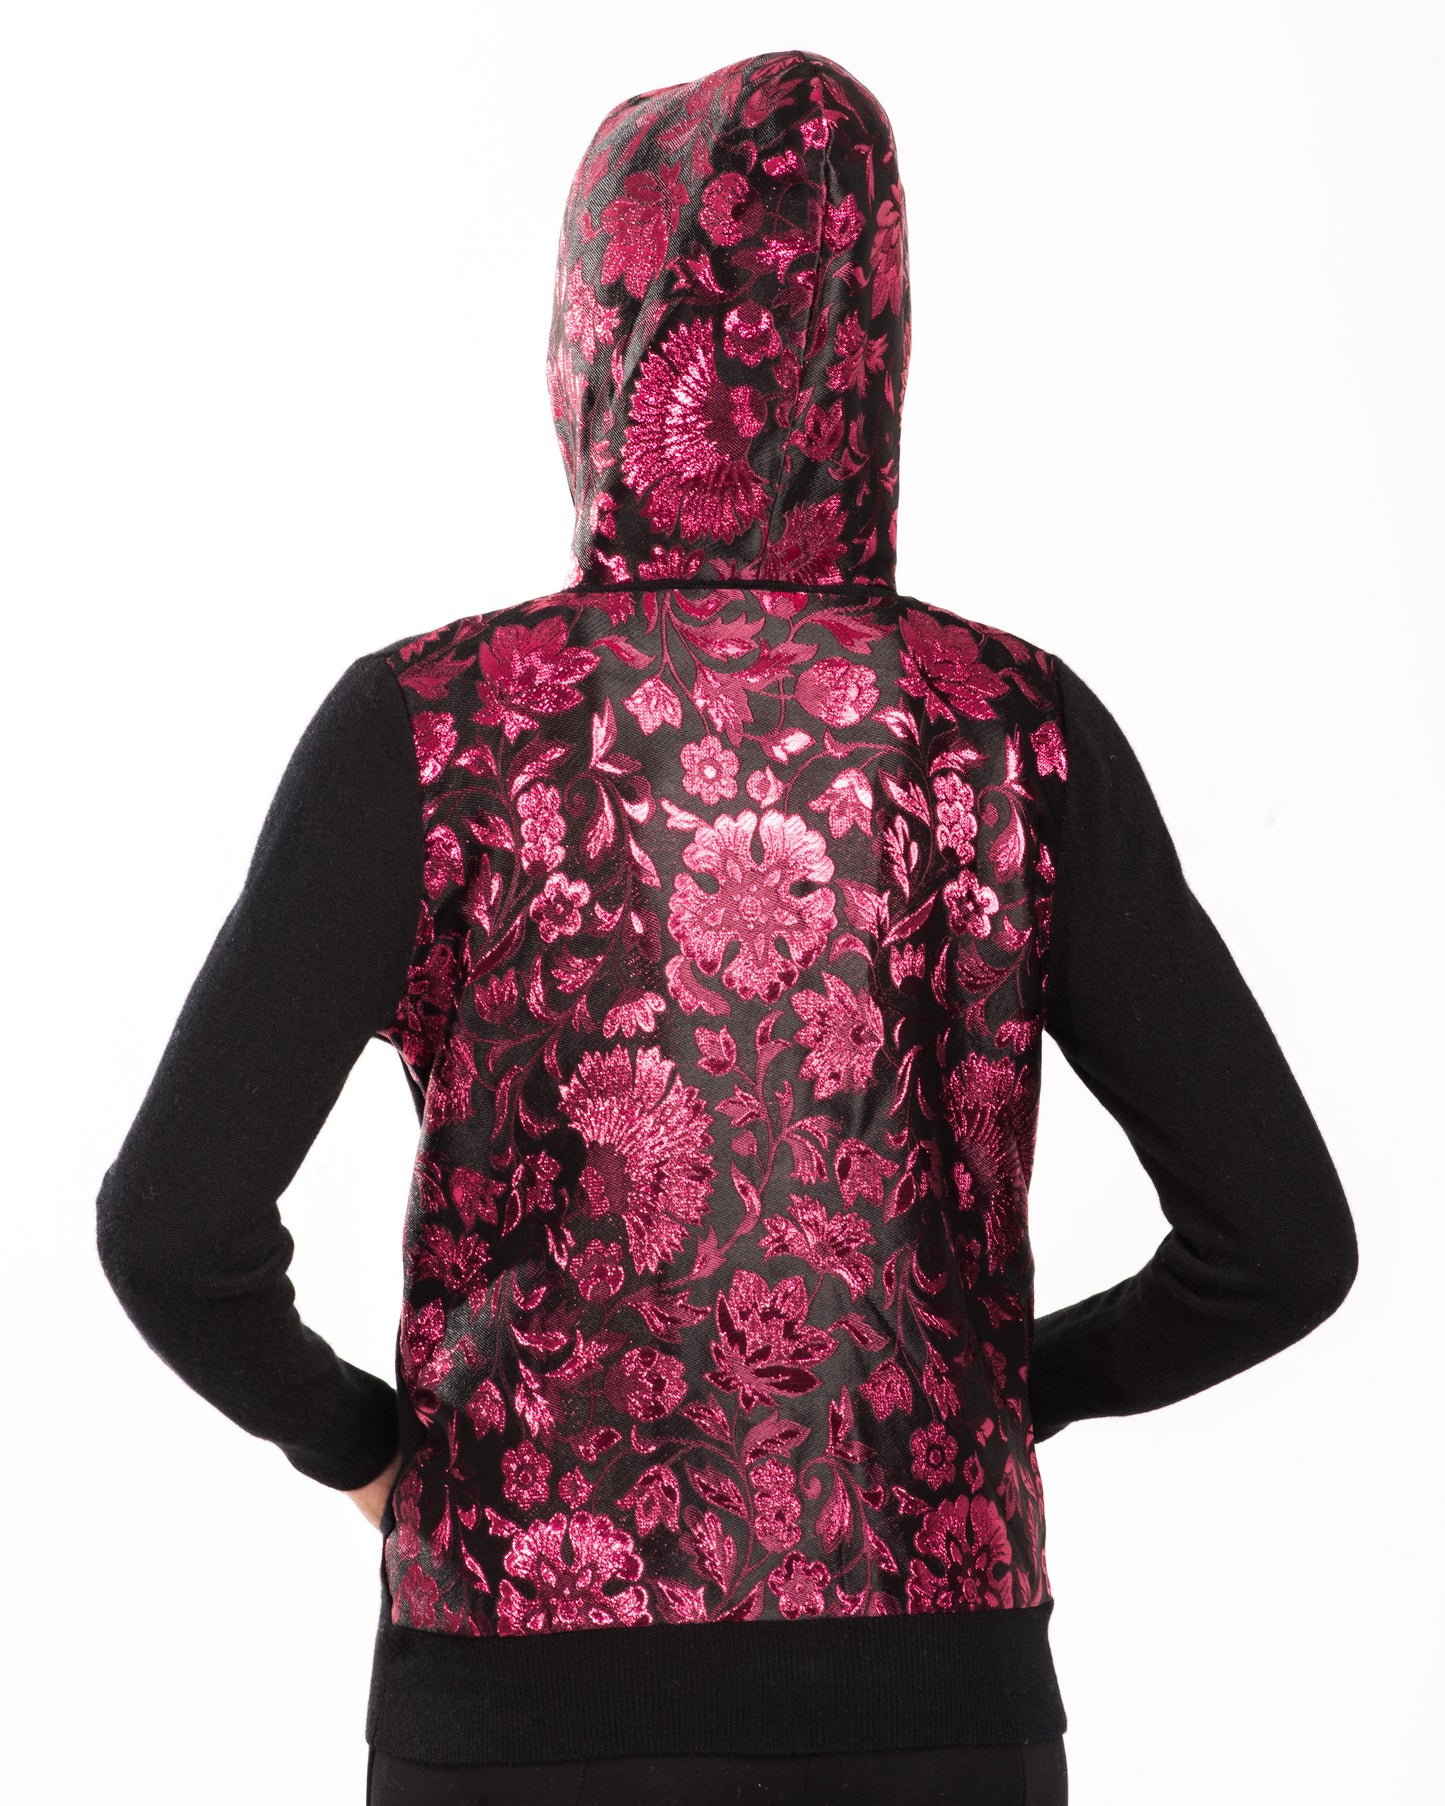 SMALL BLACK LONG SLEEVE CASHMERE HOODIE WITH HOOD AND BACK OF PINK AND BLACK METALLIC BROCADE